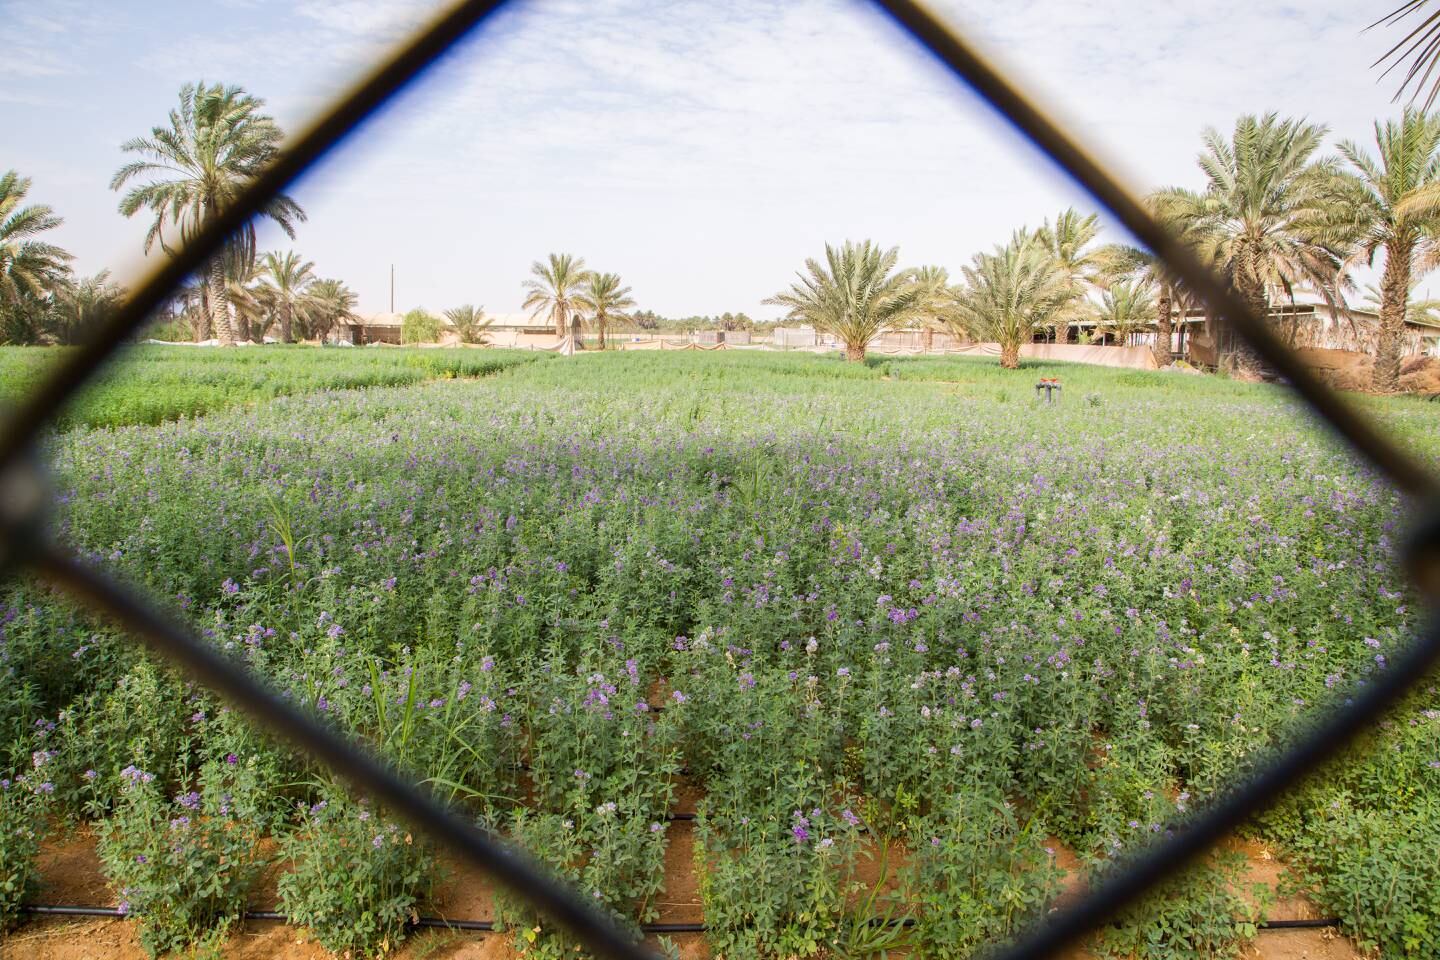 Alremethi's farm is lush with vegetable fields and palm tress. Photo: farm2table